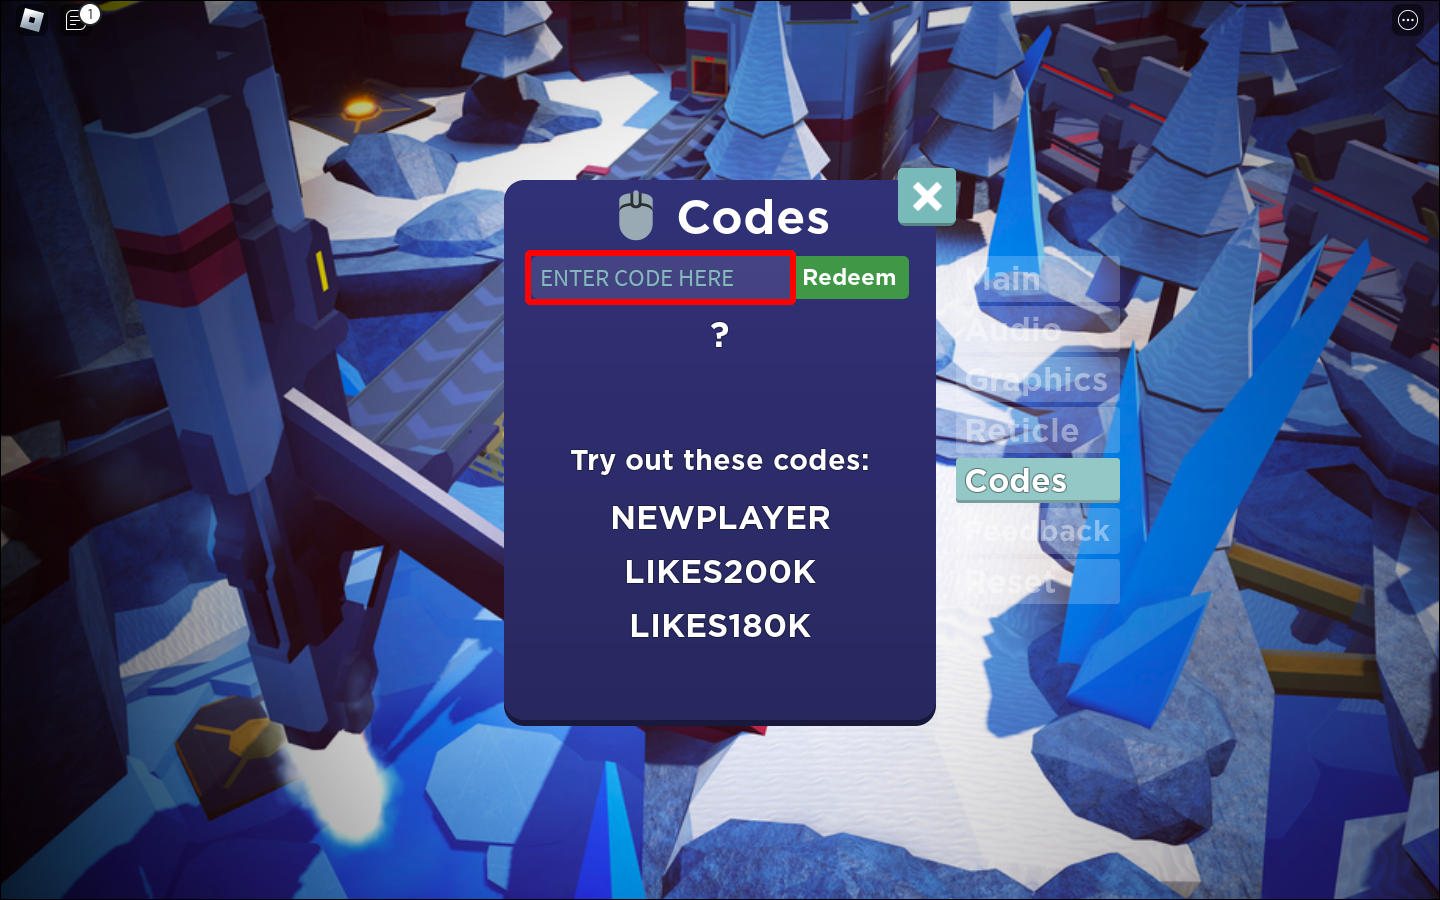 Unlock rewards and dominate the field with Aimblox codes in June 2023 on  Roblox - Hindustan Times